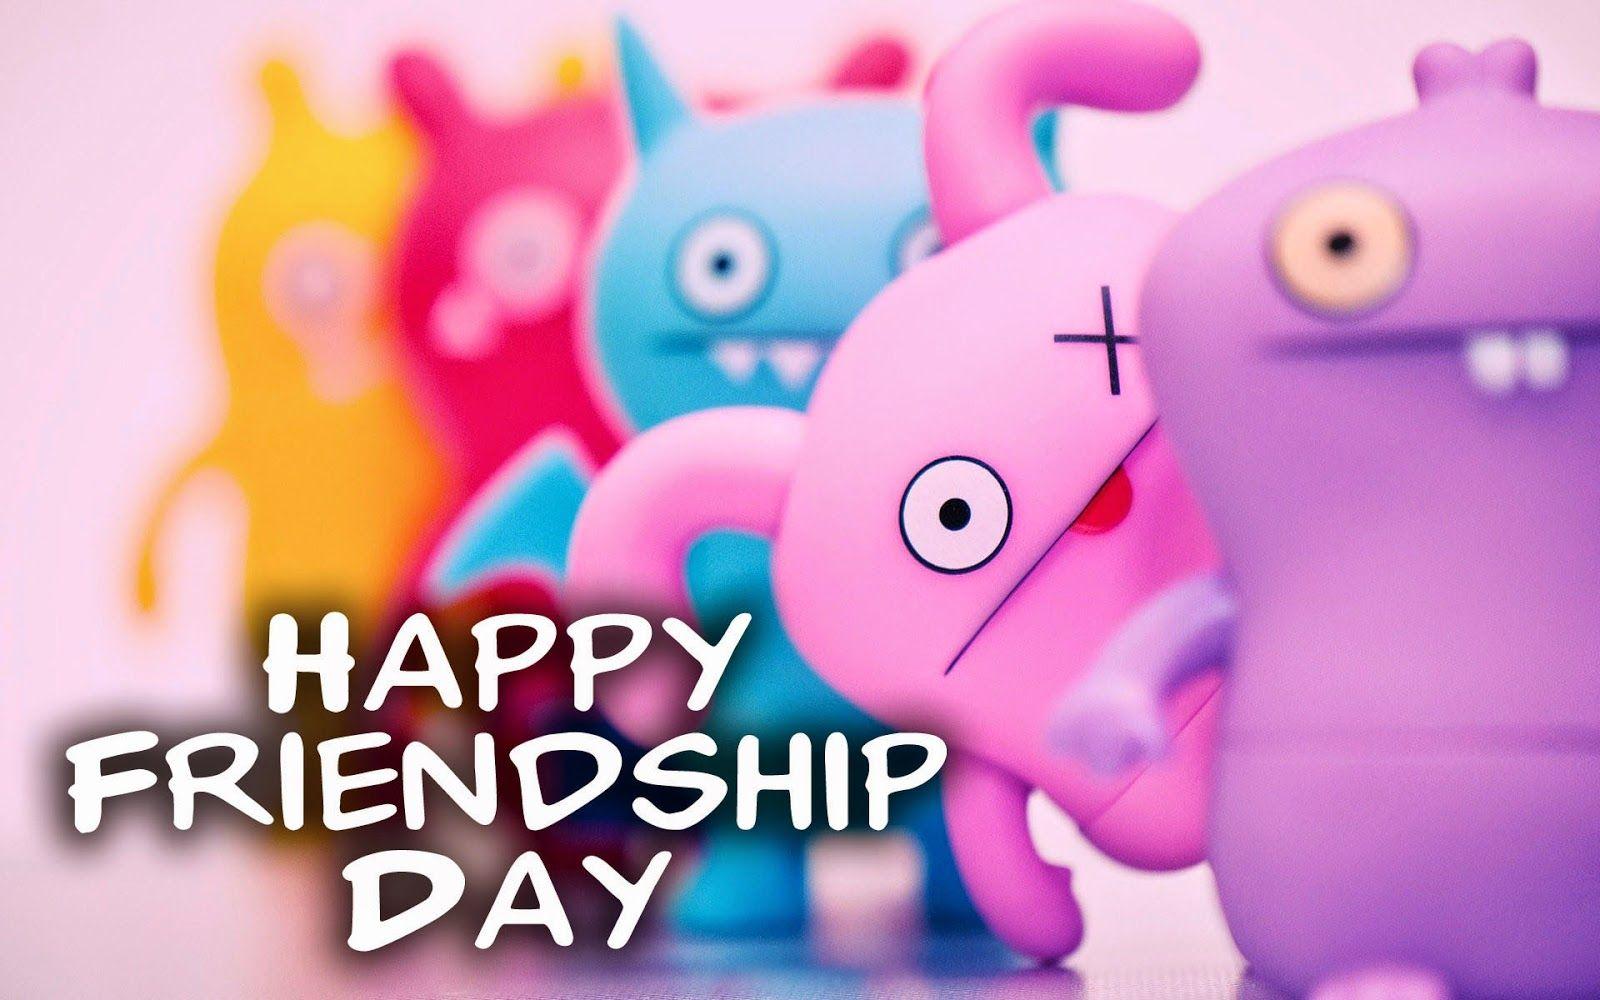 Special Happy Friendship Day 2017 Wishes Hd Wallpapers - Happy Friendship Day Date 2019 - HD Wallpaper 